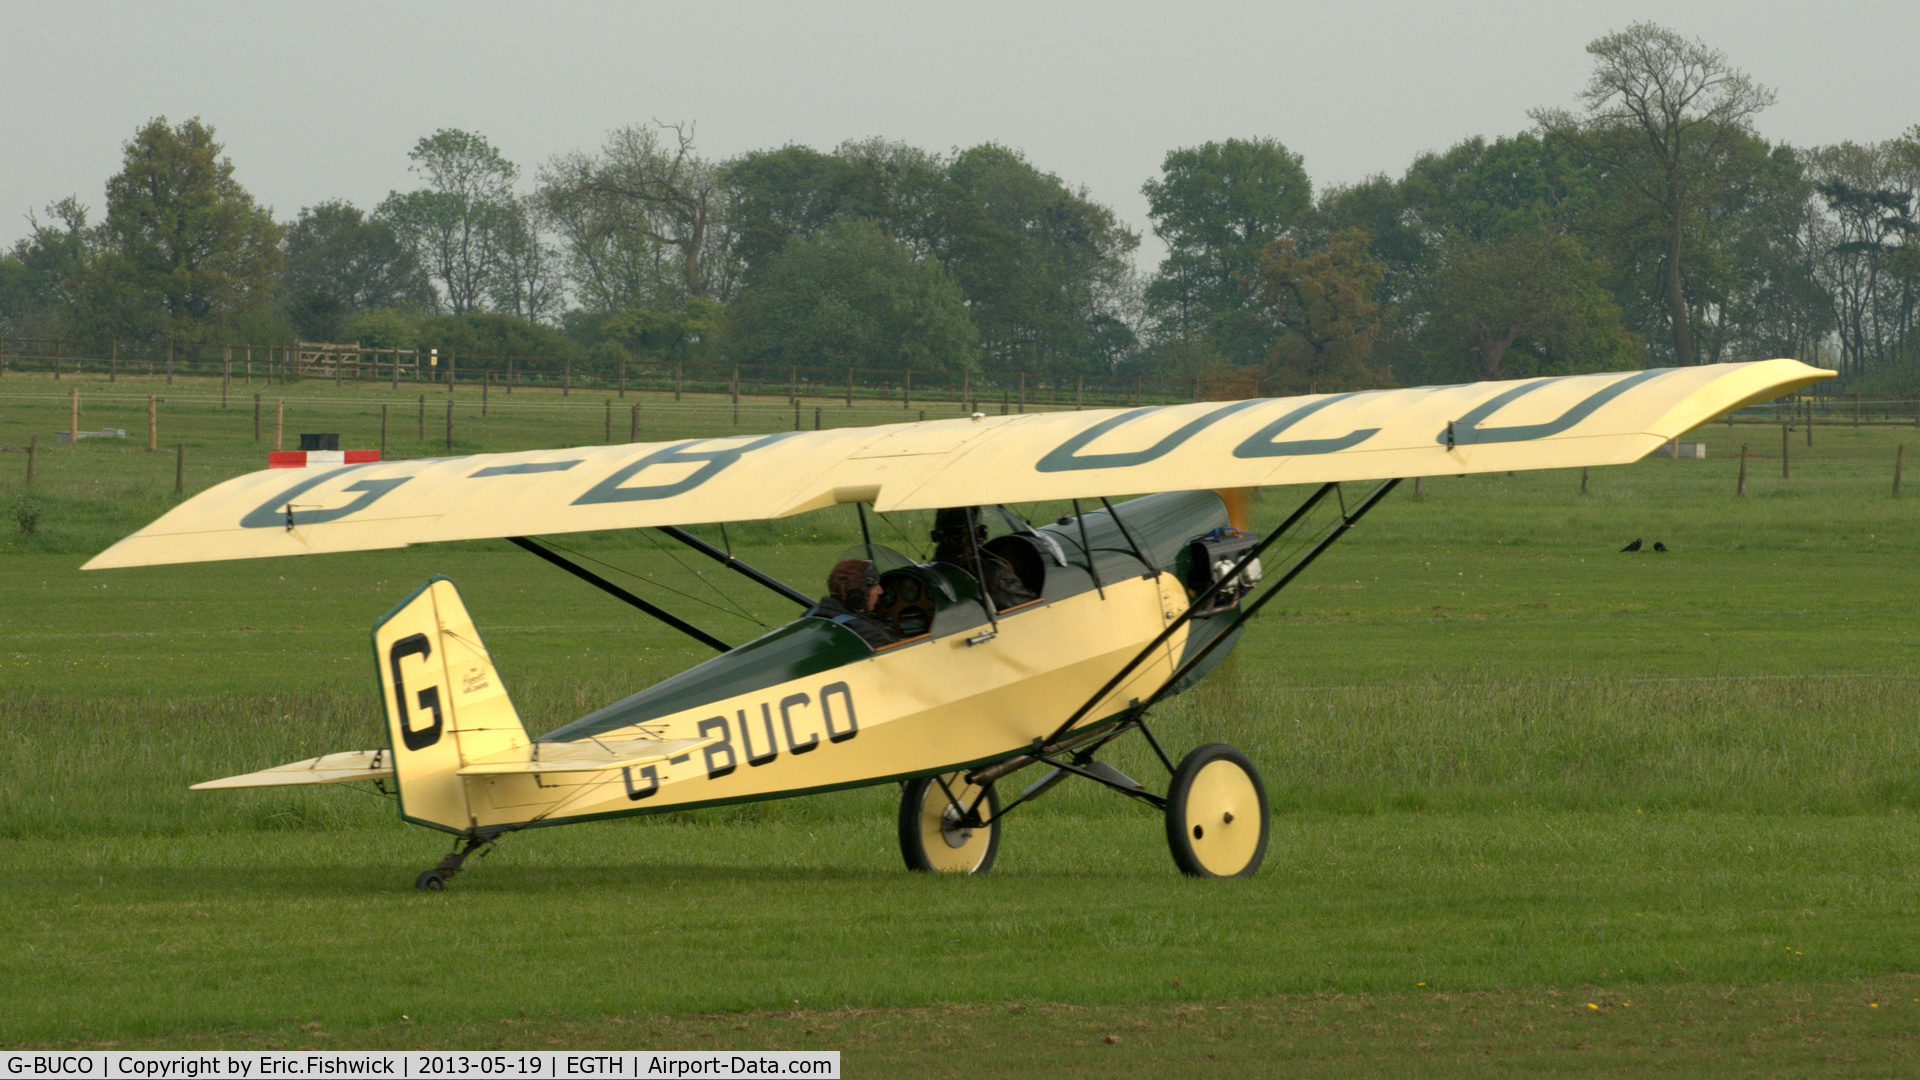 G-BUCO, 1992 Pietenpol Air Camper C/N PFA 047-11829, 2. G-BUCO departing Shuttleworth Flying Day and LAA Party in the Park, May 2013.